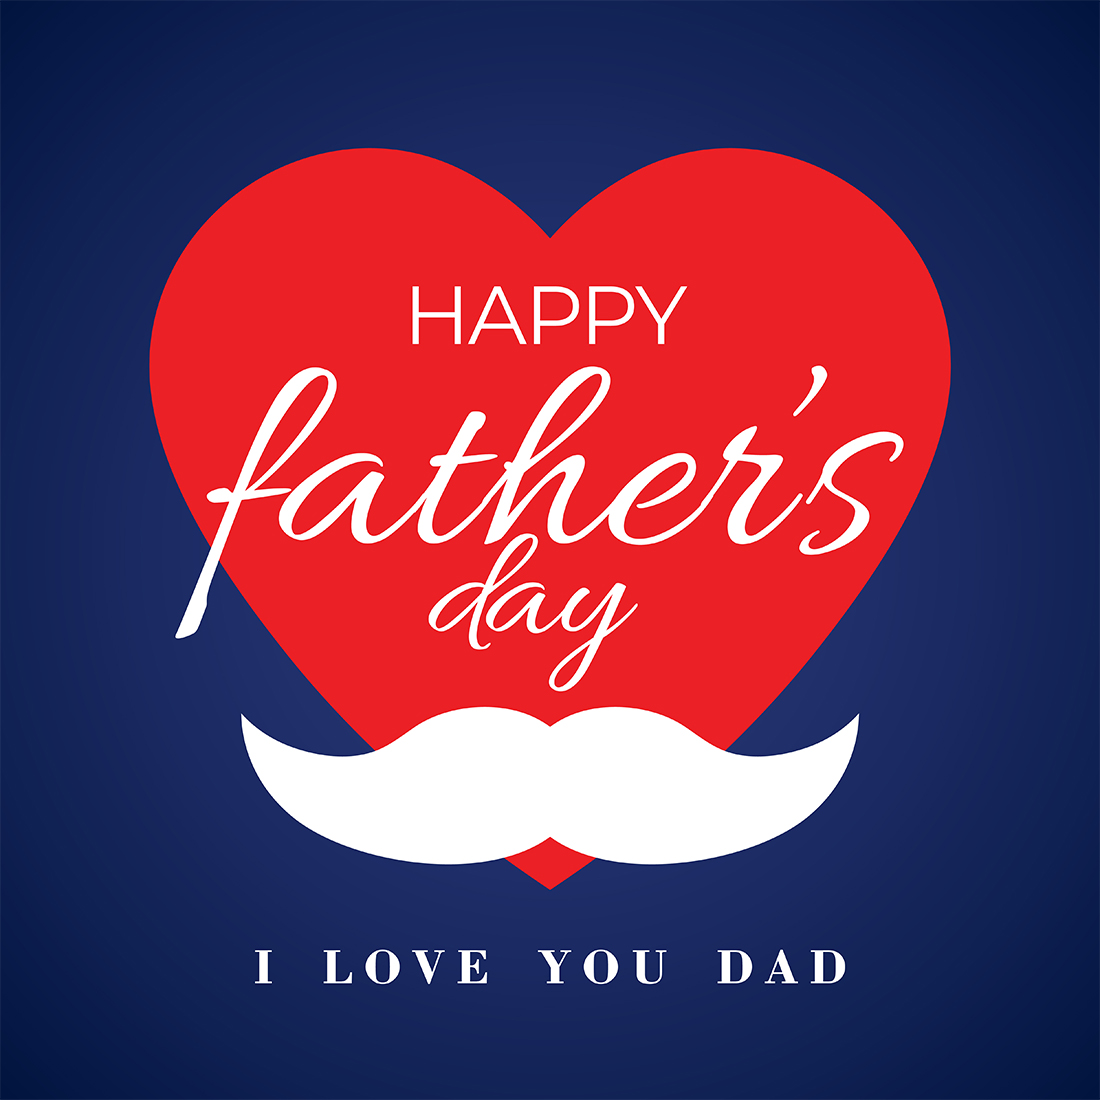 Happy father's day design templates cover image.